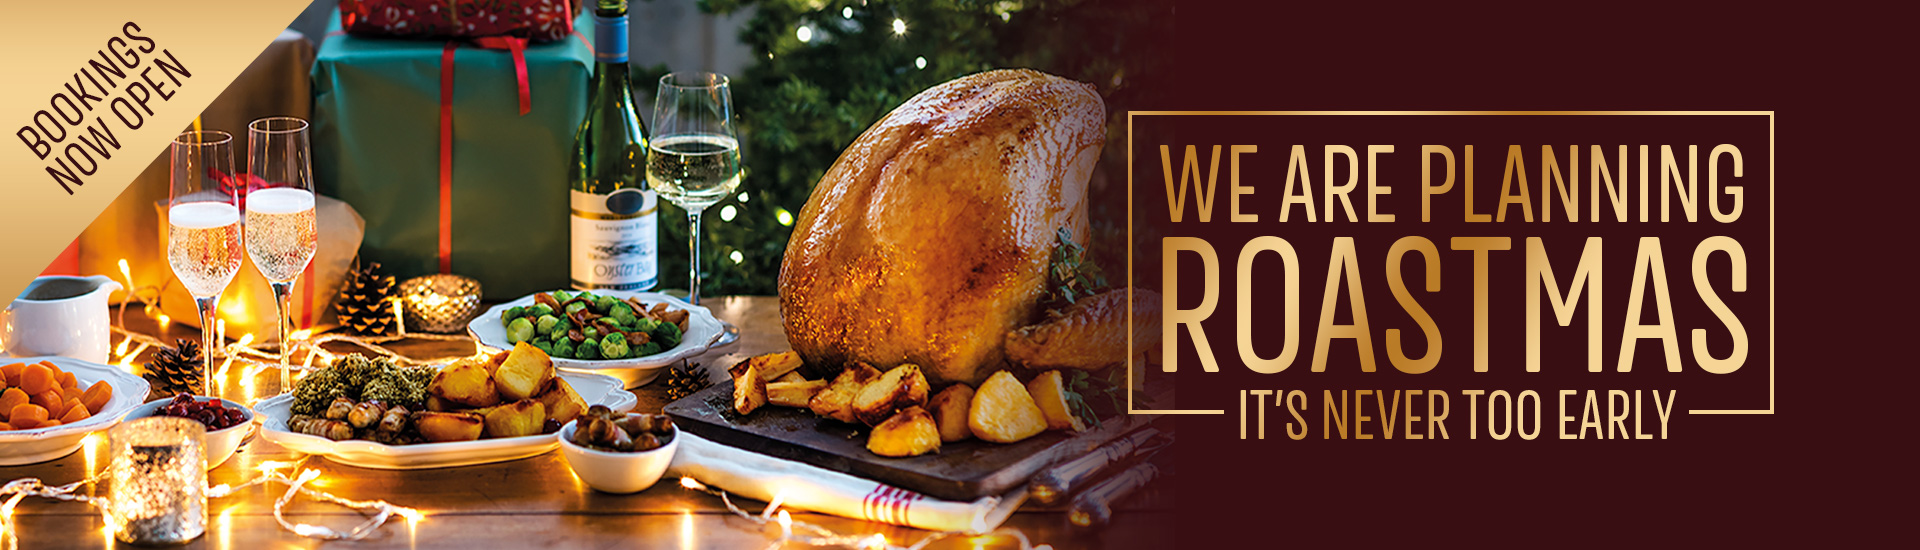 Christmas 2022 at your local Toby Carvery Bathgate Farm | Home of the Roast